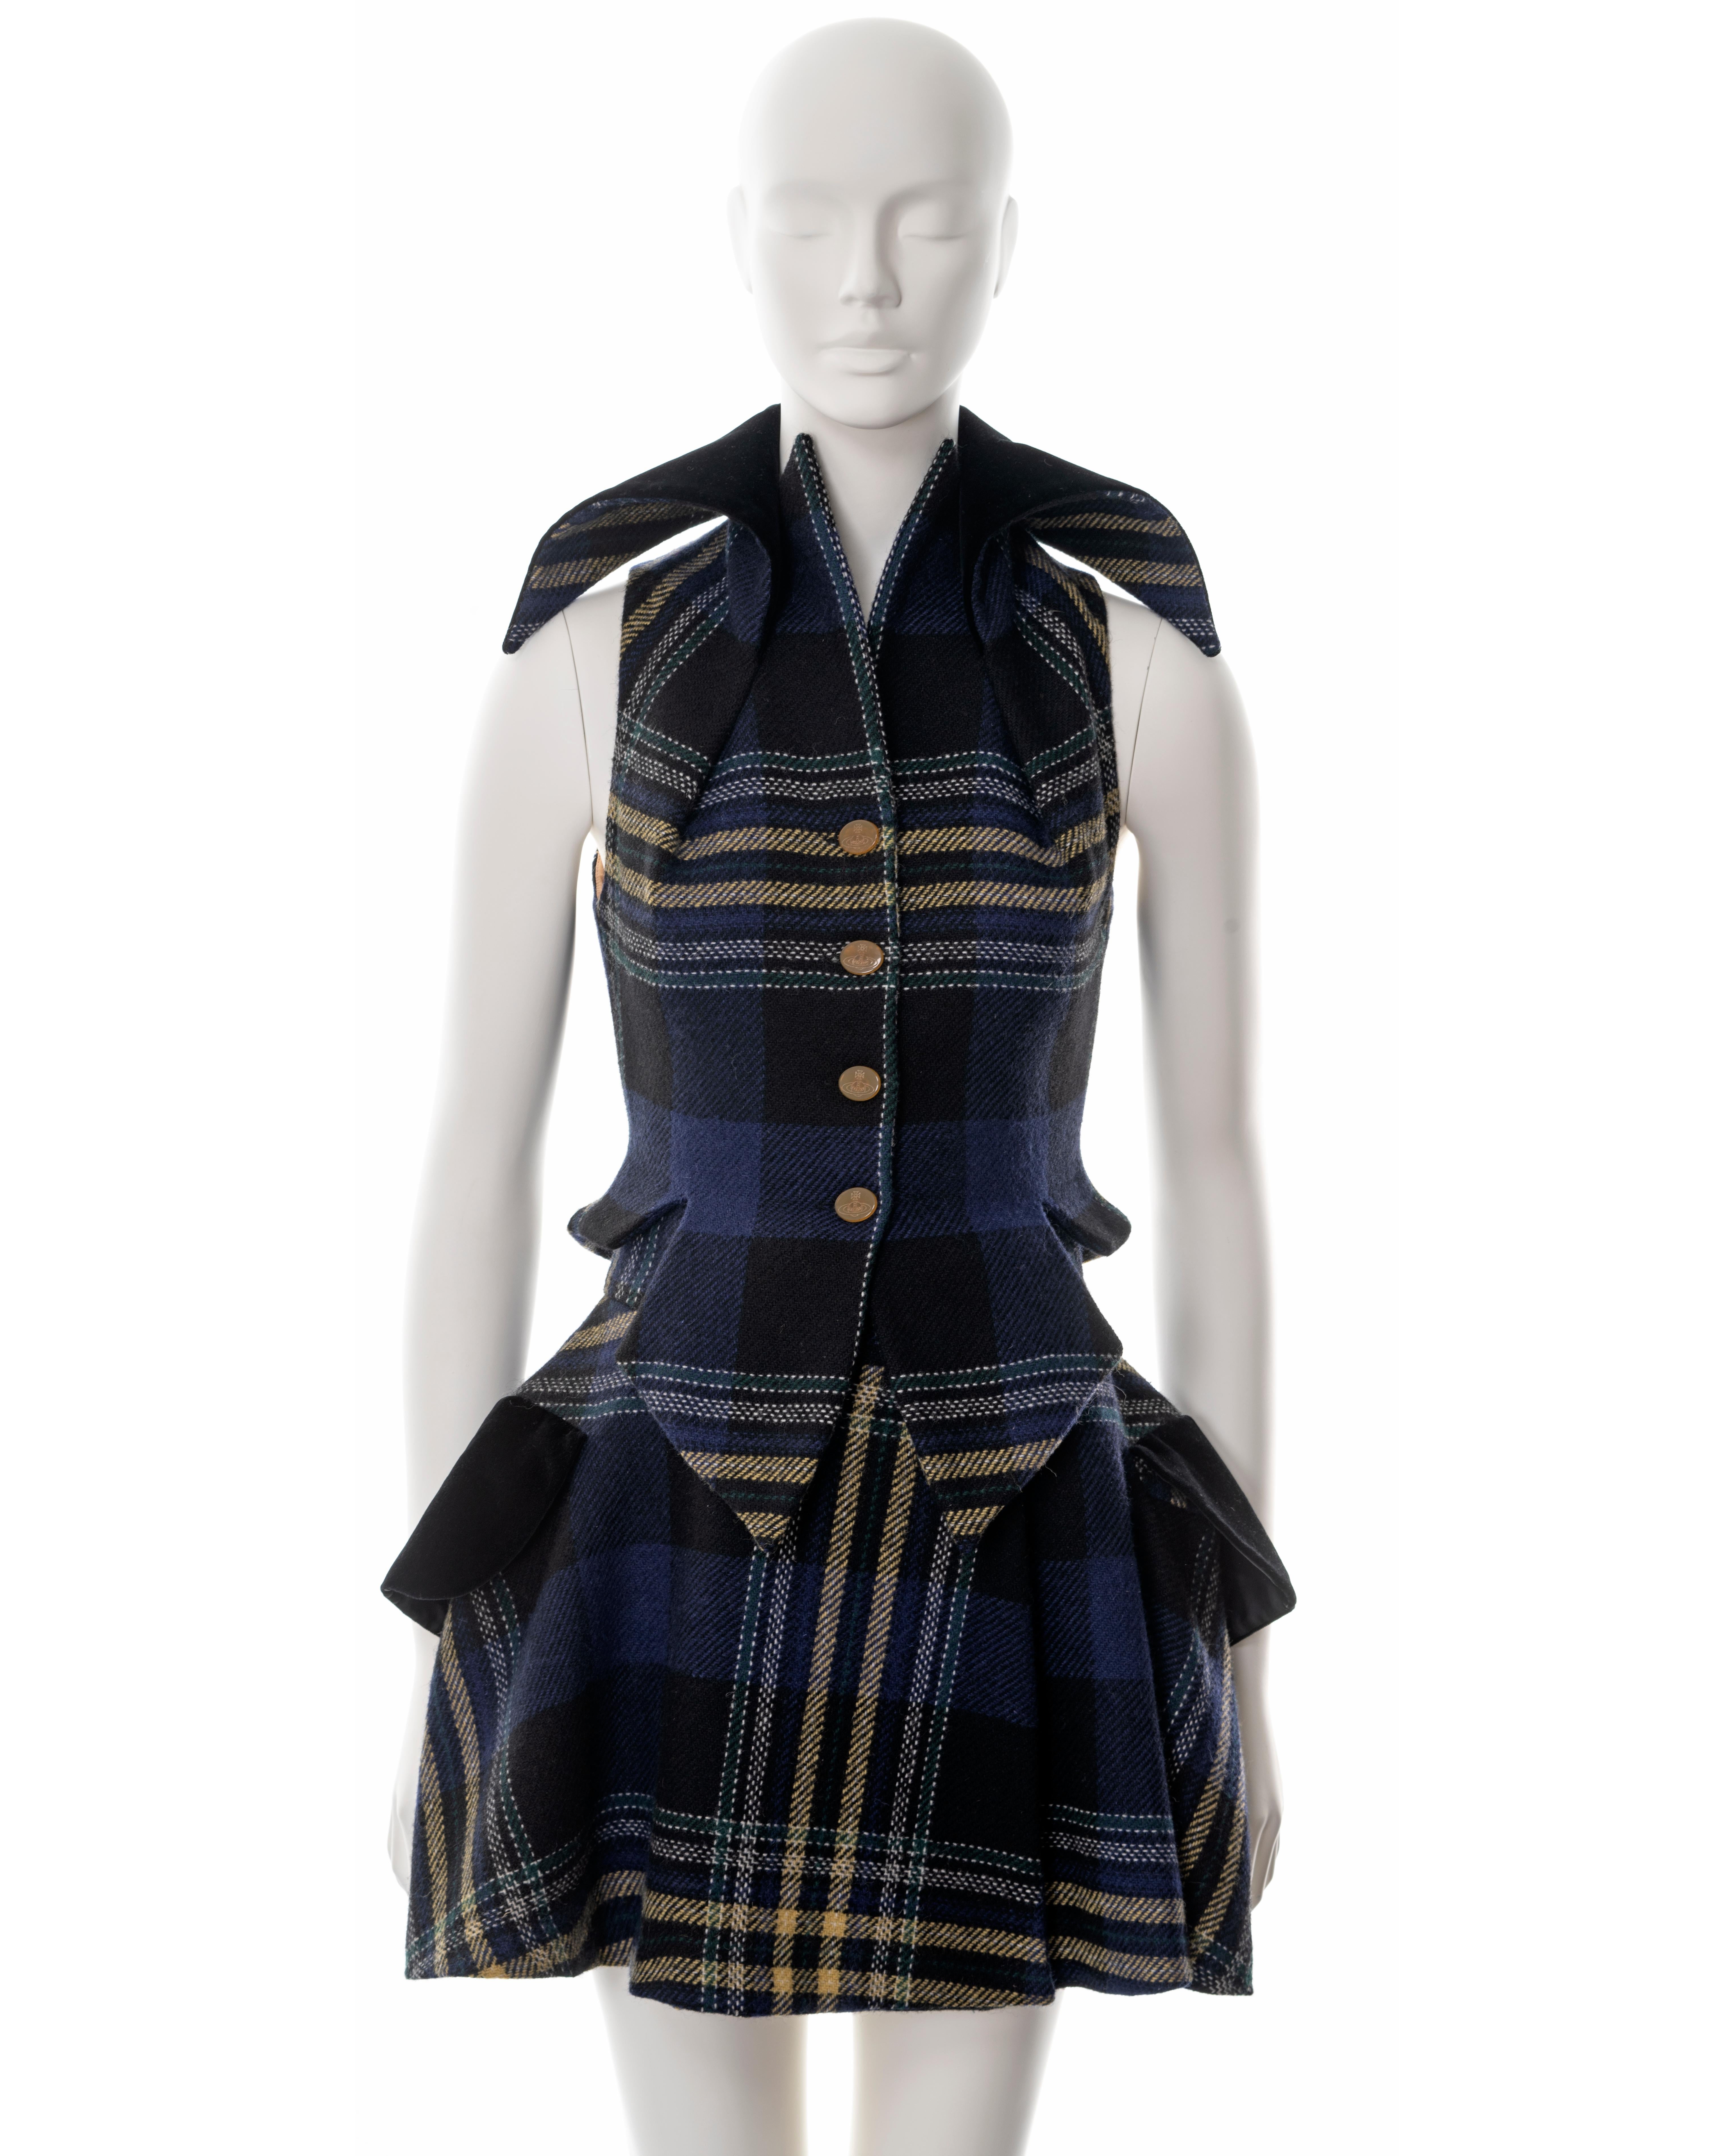 ▪ Vivienne Westwood waistcoat and skirt set
▪ Fall-Winter 1994
▪ Blue, yellow, green and white tartan wool 
▪ Fitted waistcoat 
▪ Orb etched buttons 
▪ Black velvet collar and pocket flaps 
▪ High-waisted mini skirt with wide-cut hips 
▪ IT 40 - FR